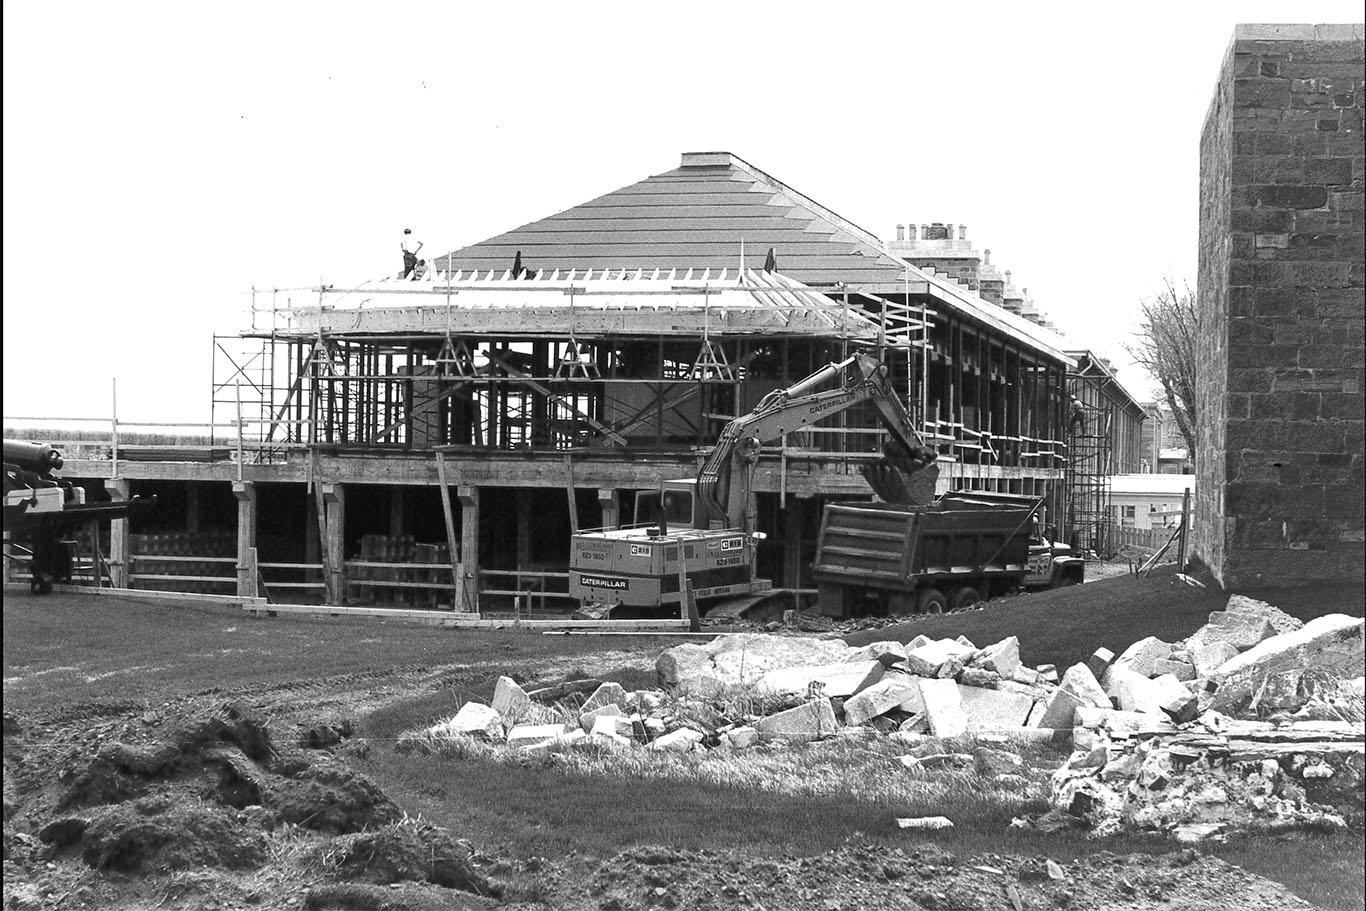 Construction of the Public Wing, 1983